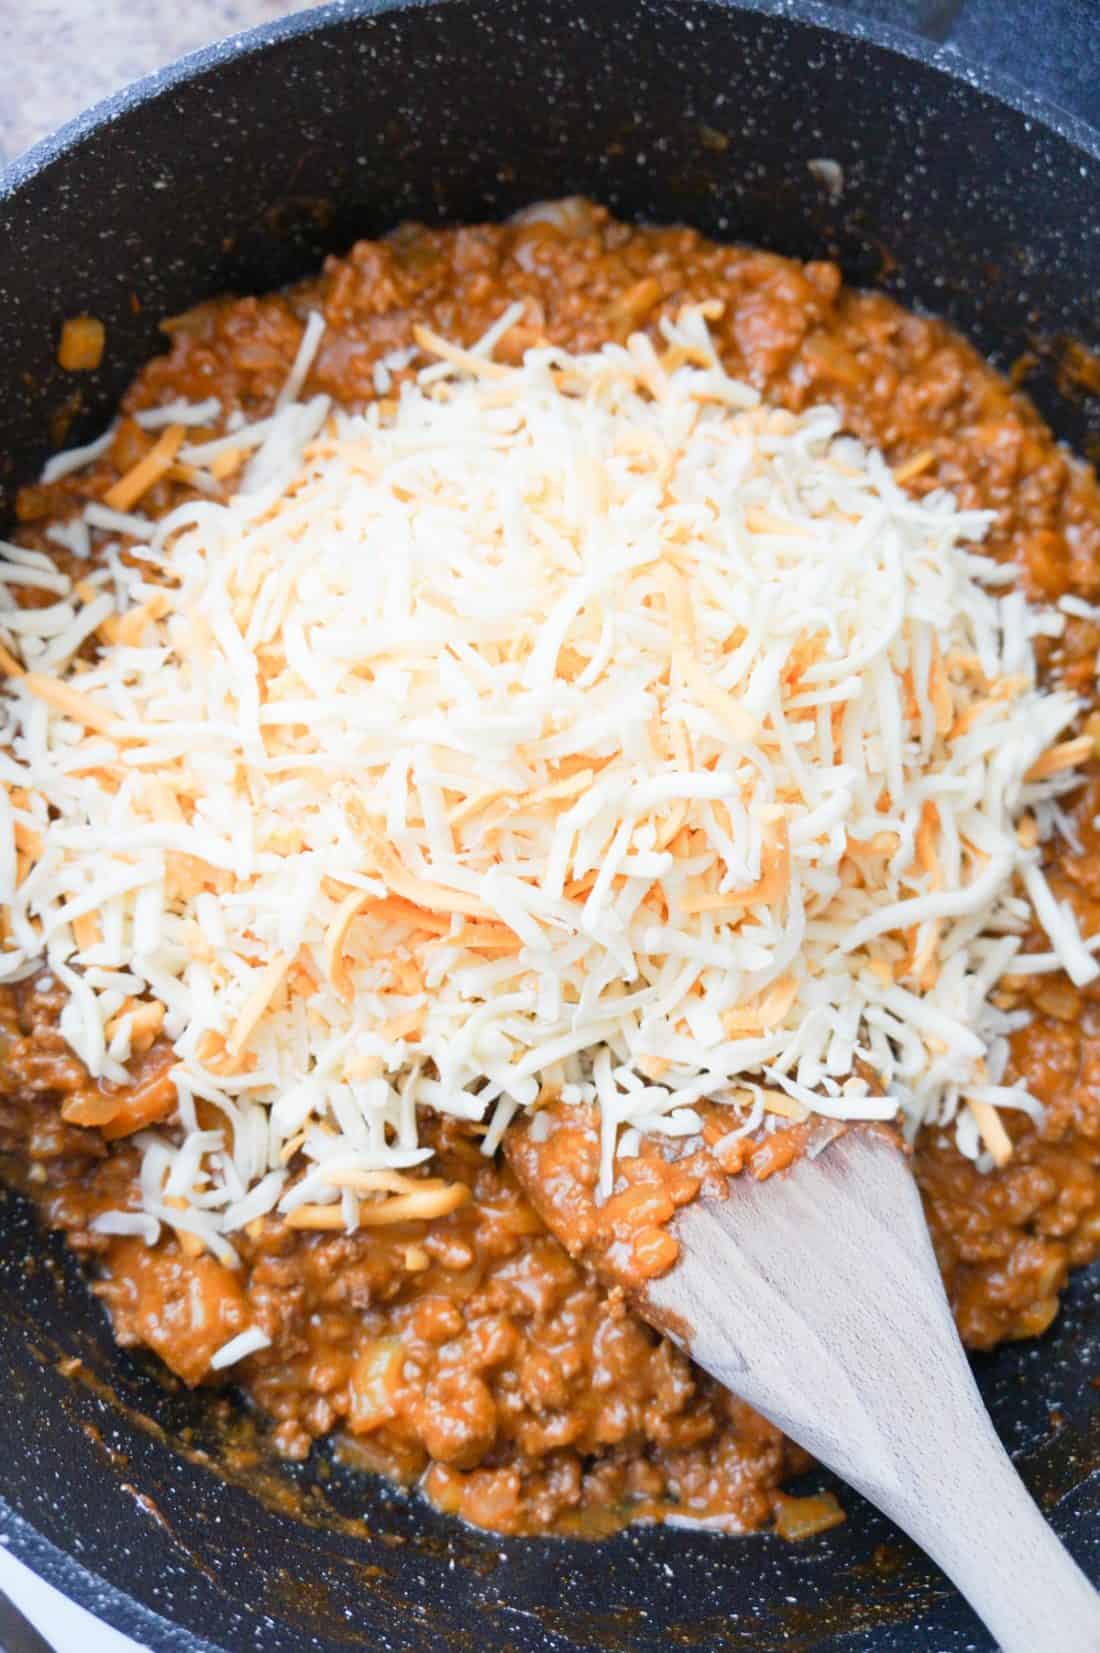 Cheesy Sloppy Joes - THIS IS NOT DIET FOOD